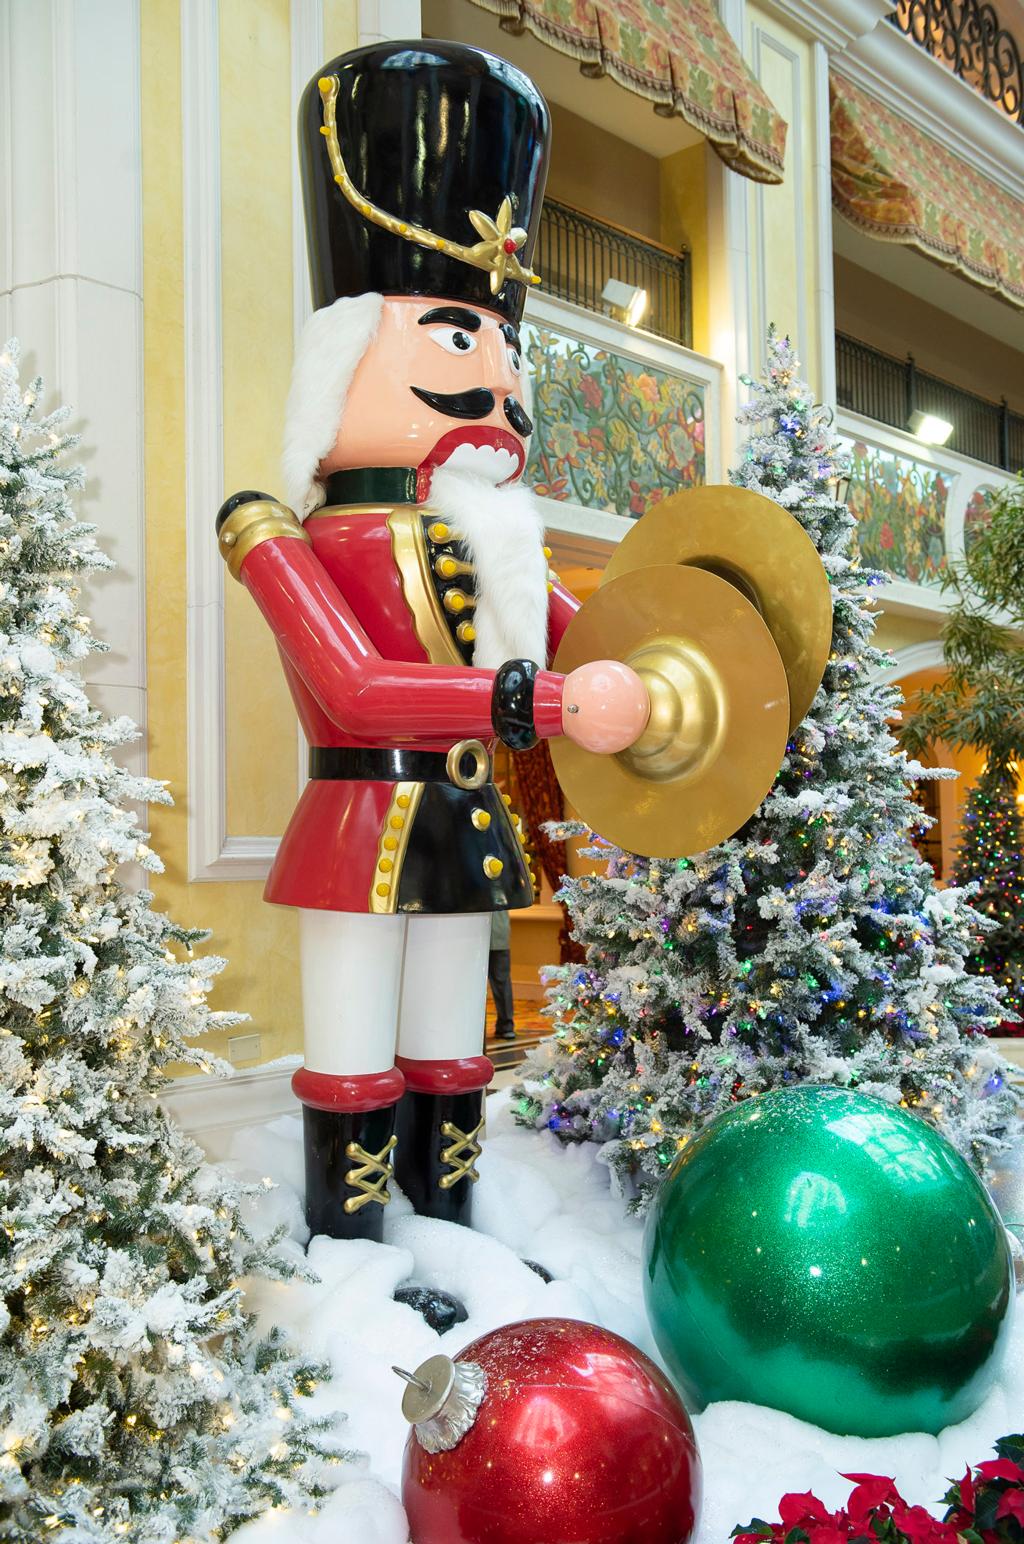 Holidays at Beau Rivage embrace the magic of the season